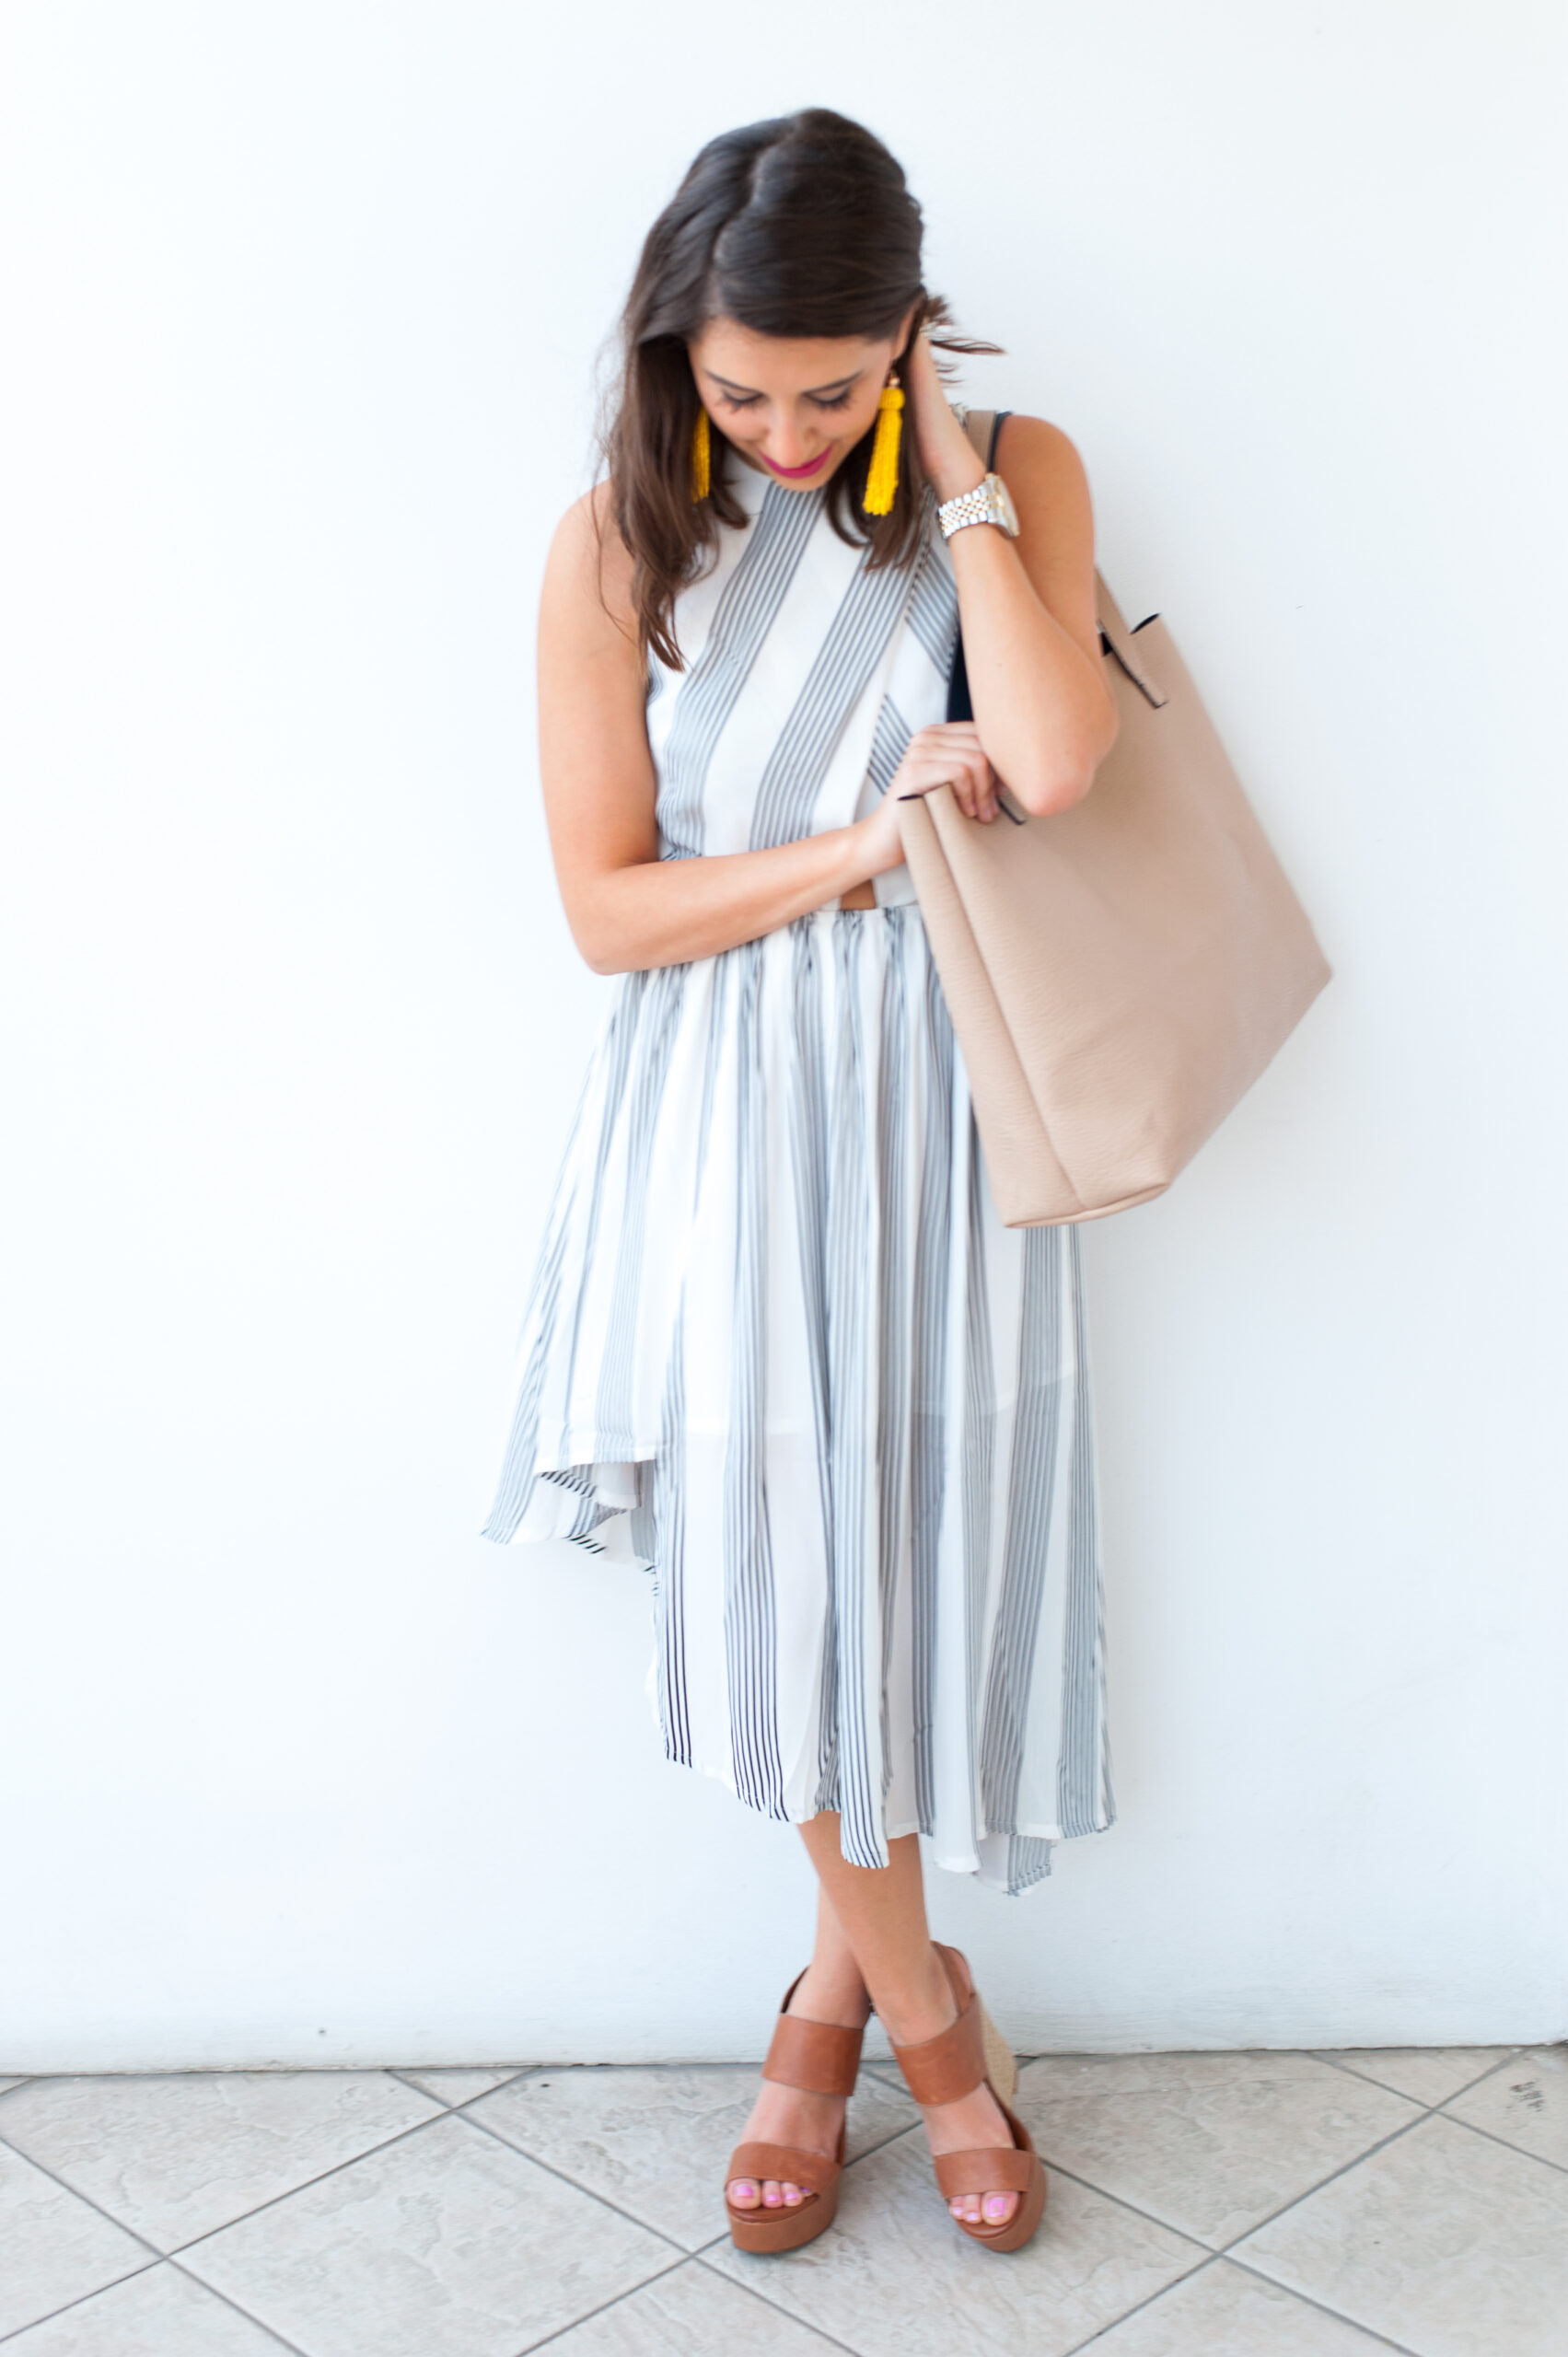 Dress Up Buttercup // A Houston-based fashion and inspiration blog developed to daily inspire your own personal style by Dede Raad | Elliatt 'Linear' Stripe Crepe Midi Dress